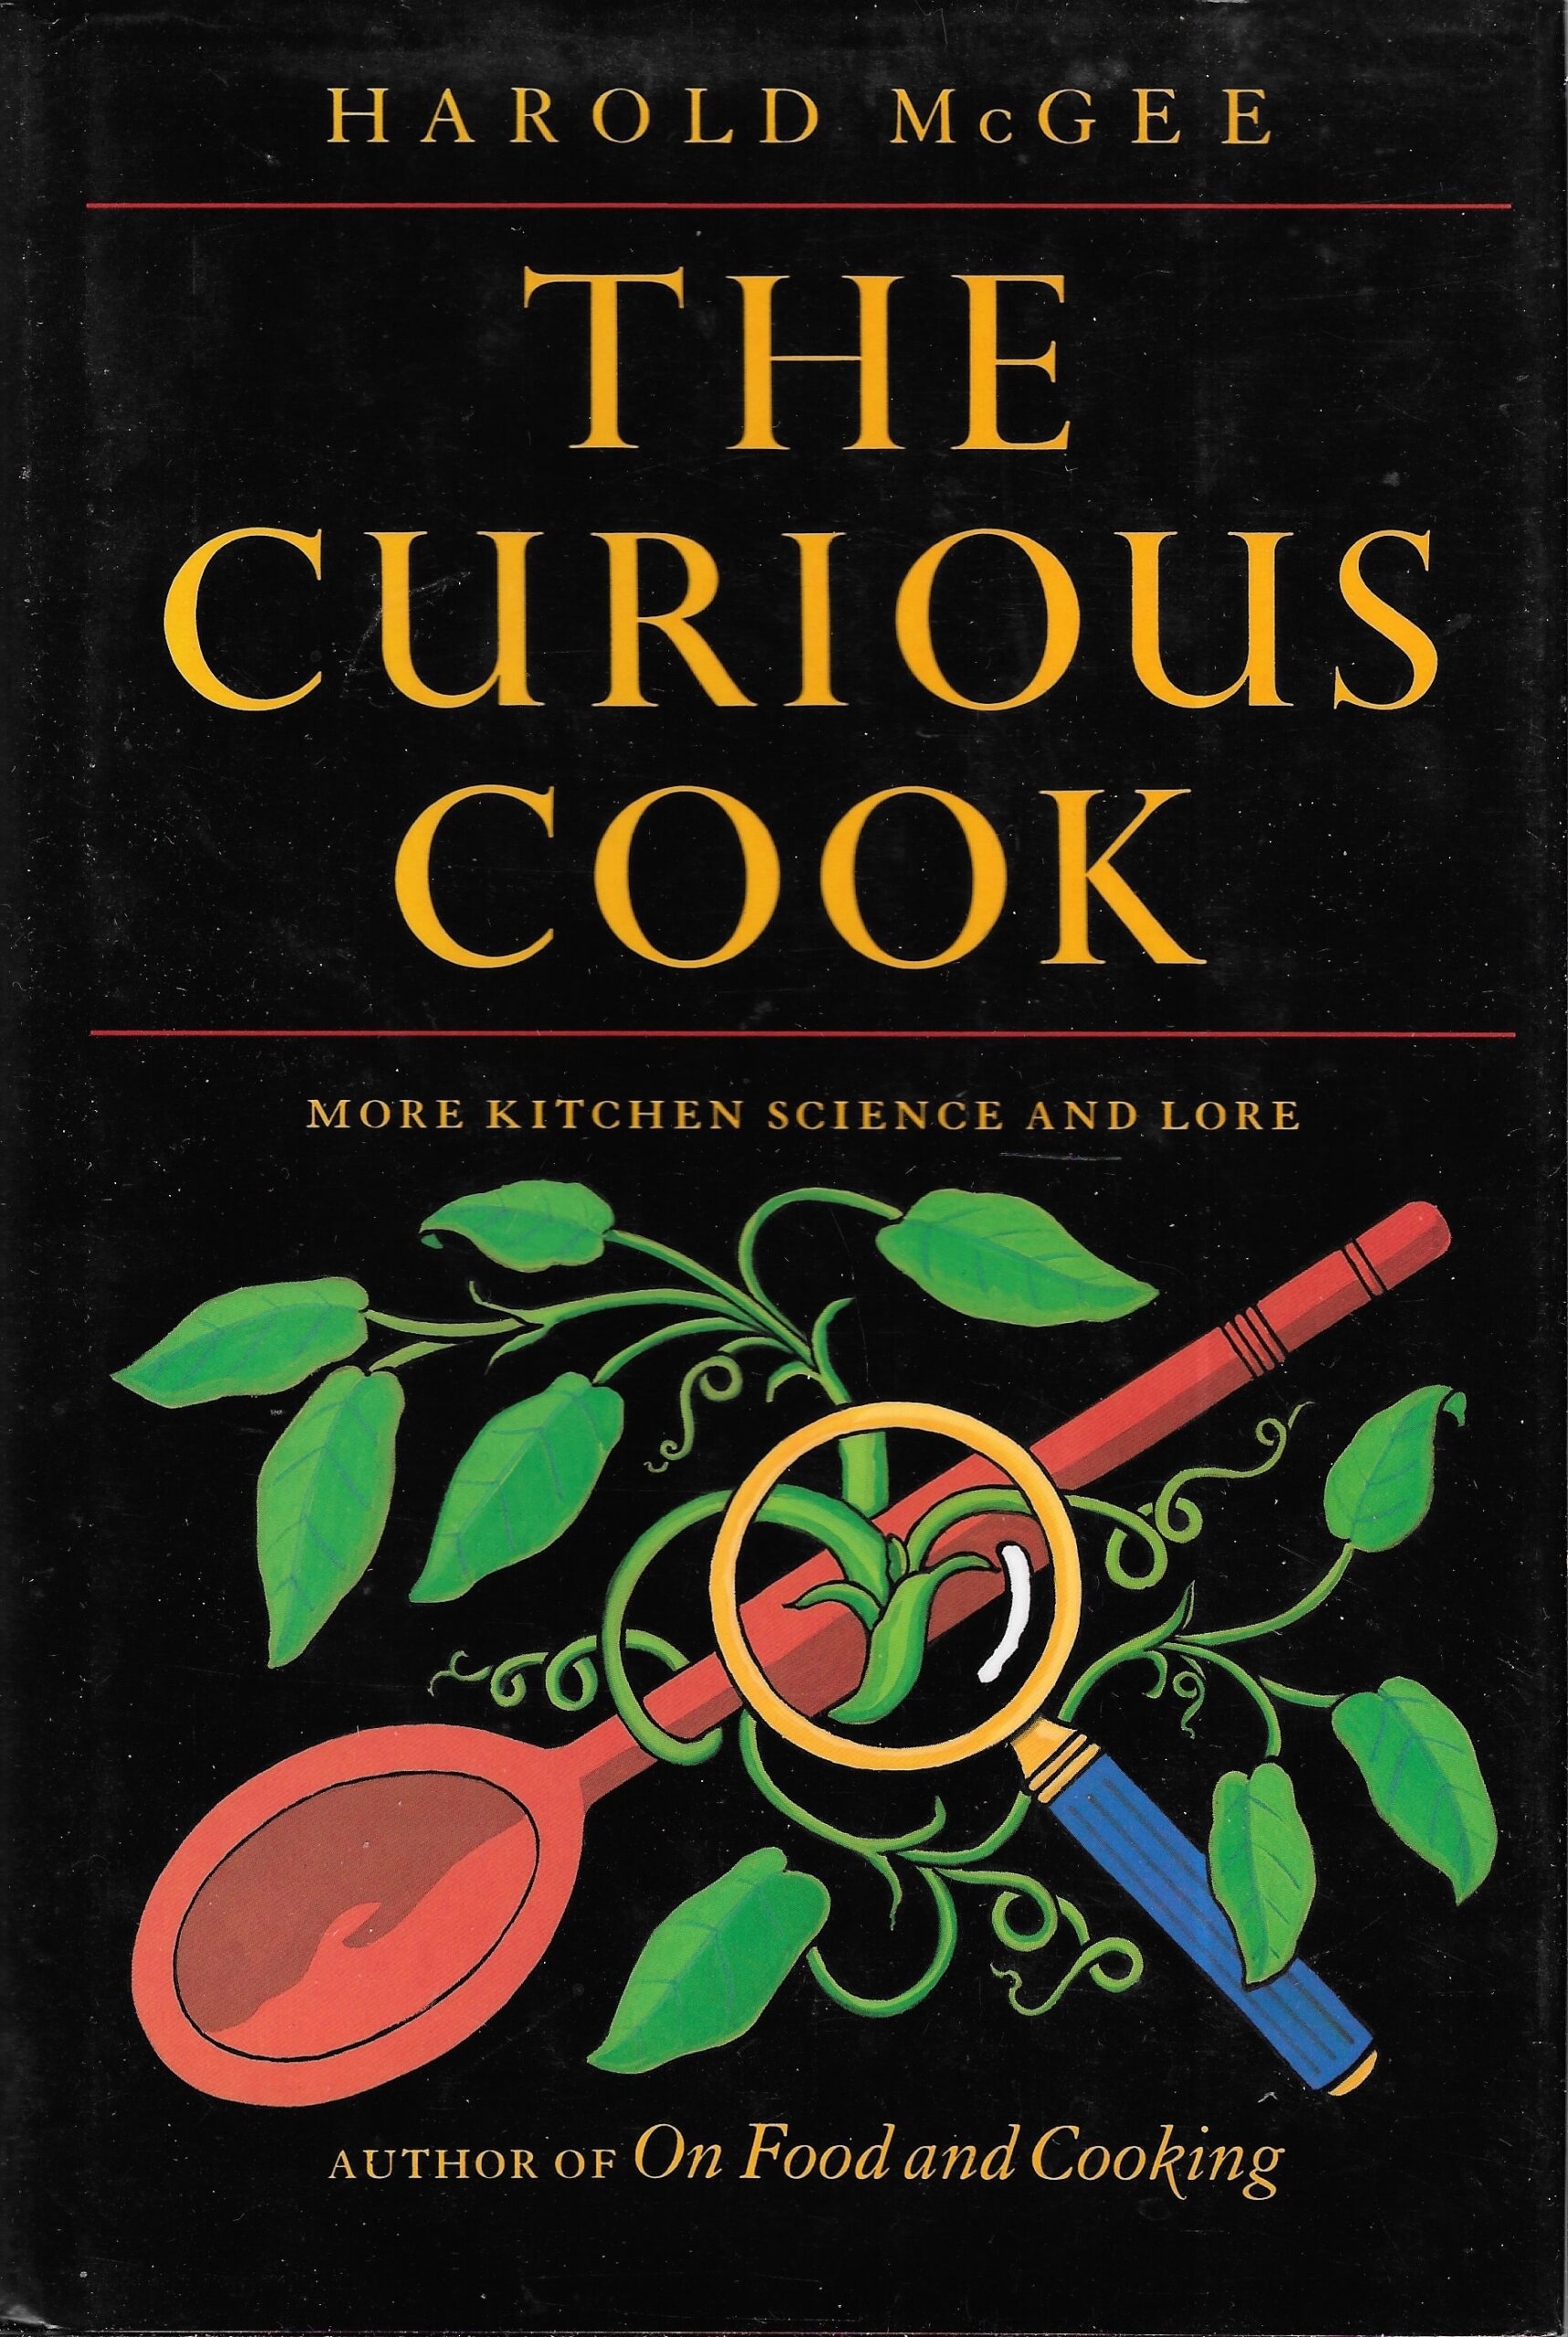 On Food and Cooking: The Science and Lore by McGee, Harold